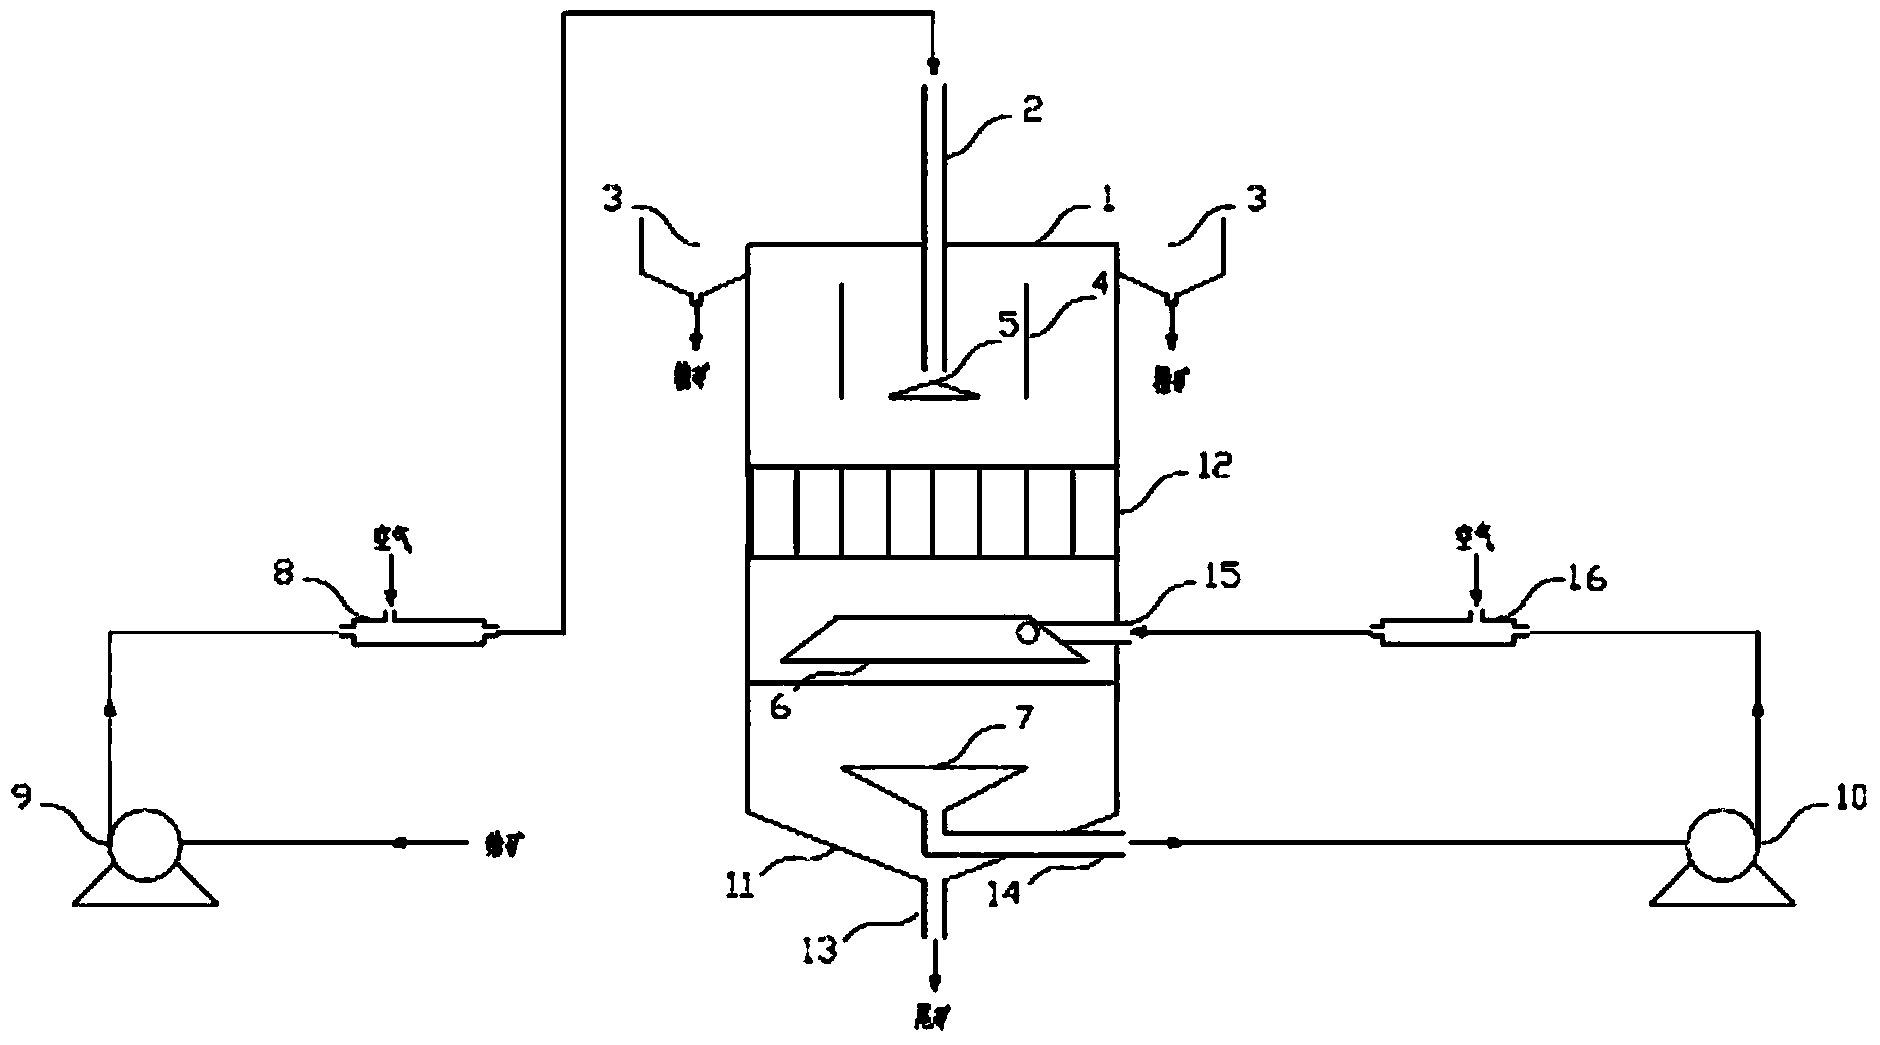 Fluorite ore sorting device and method